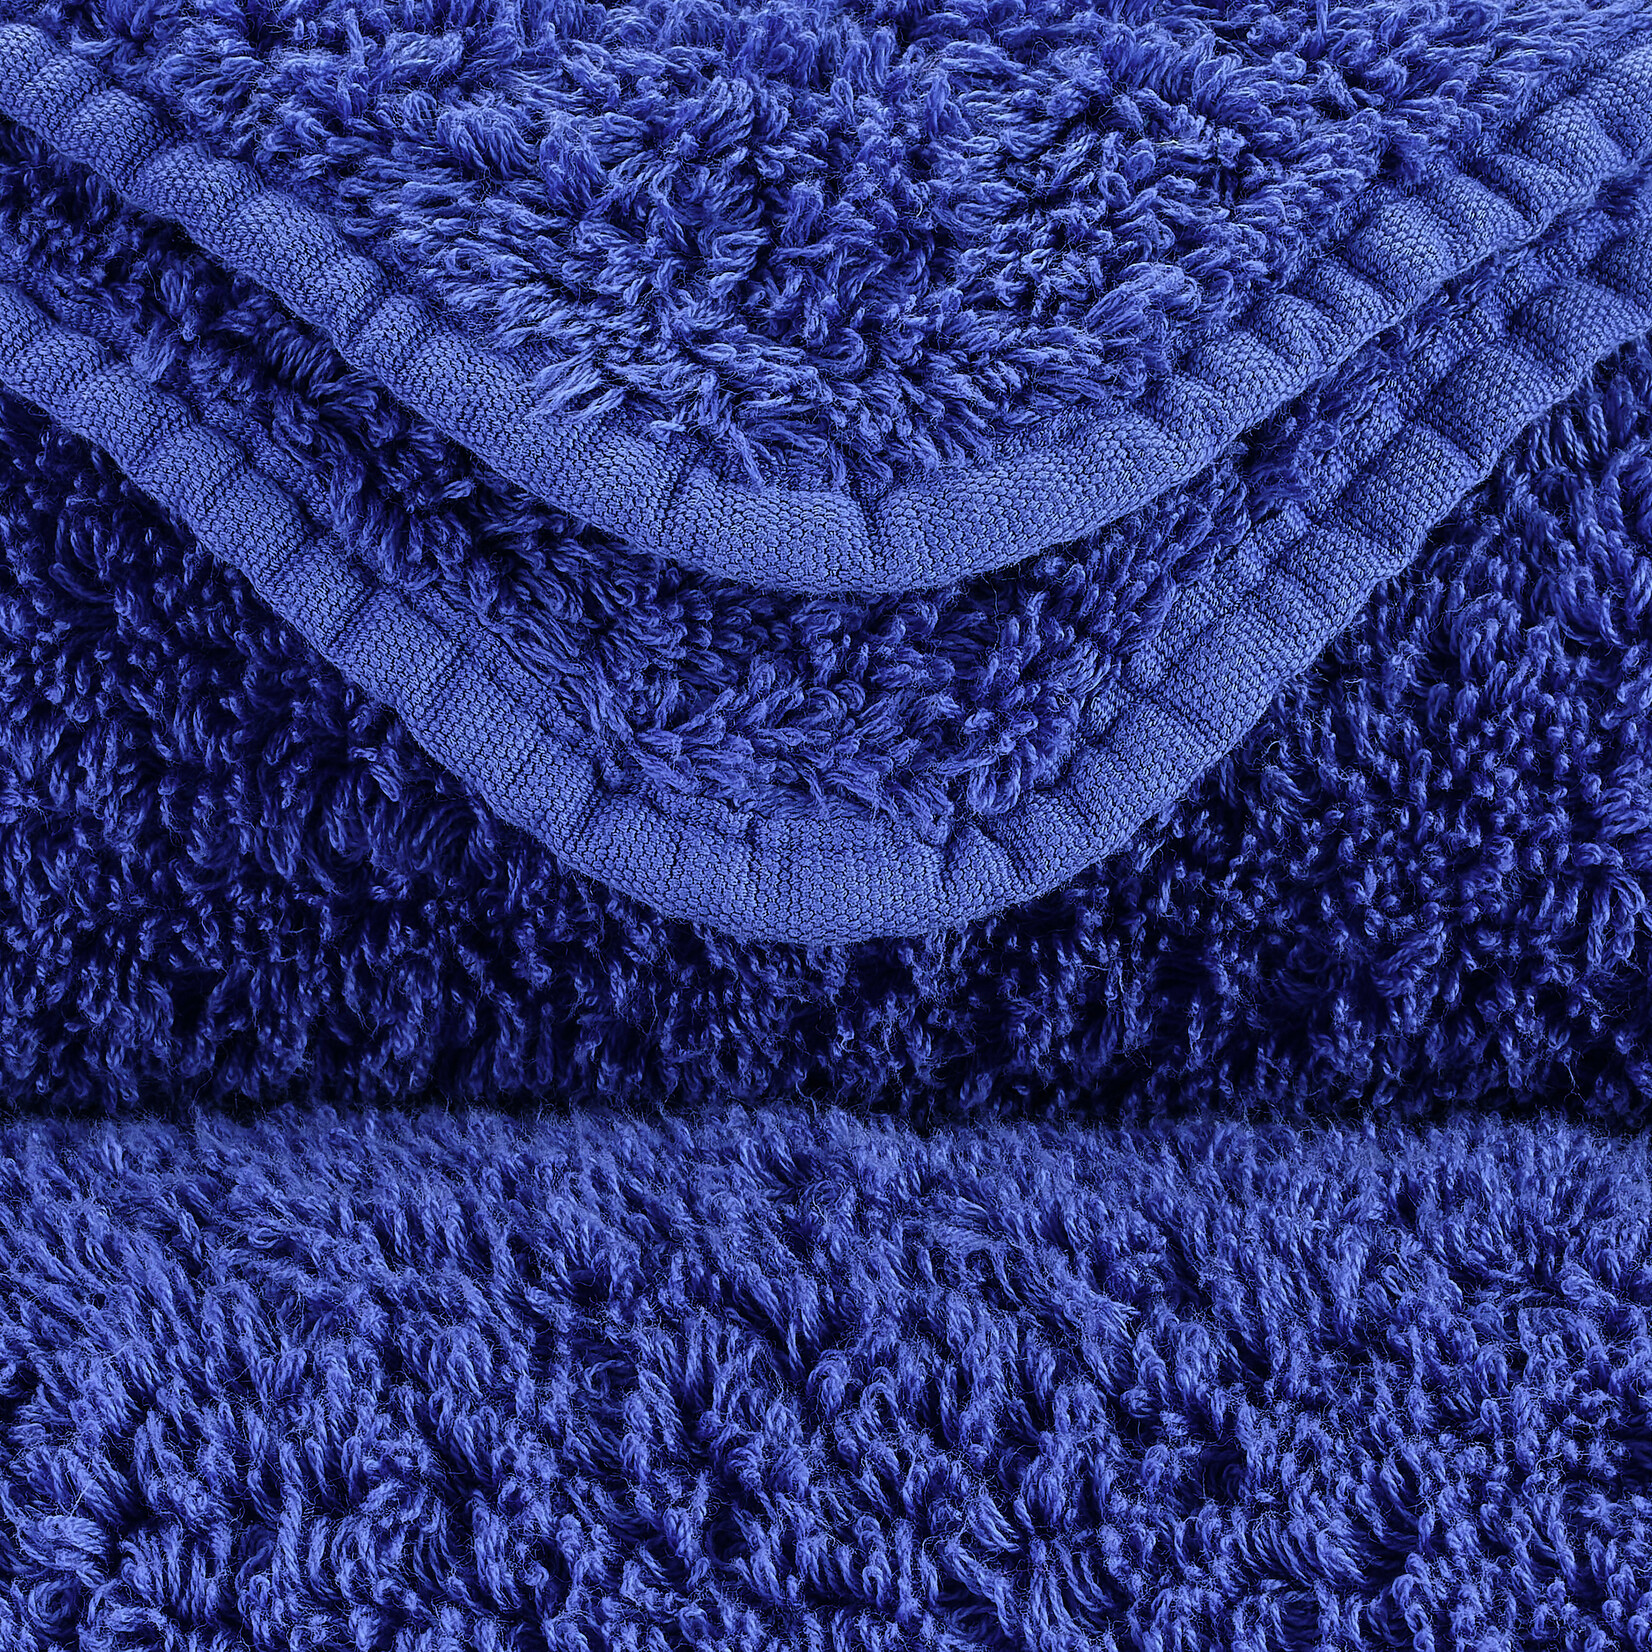 Abyss Abyss Super Pile Towels 335 Indigo